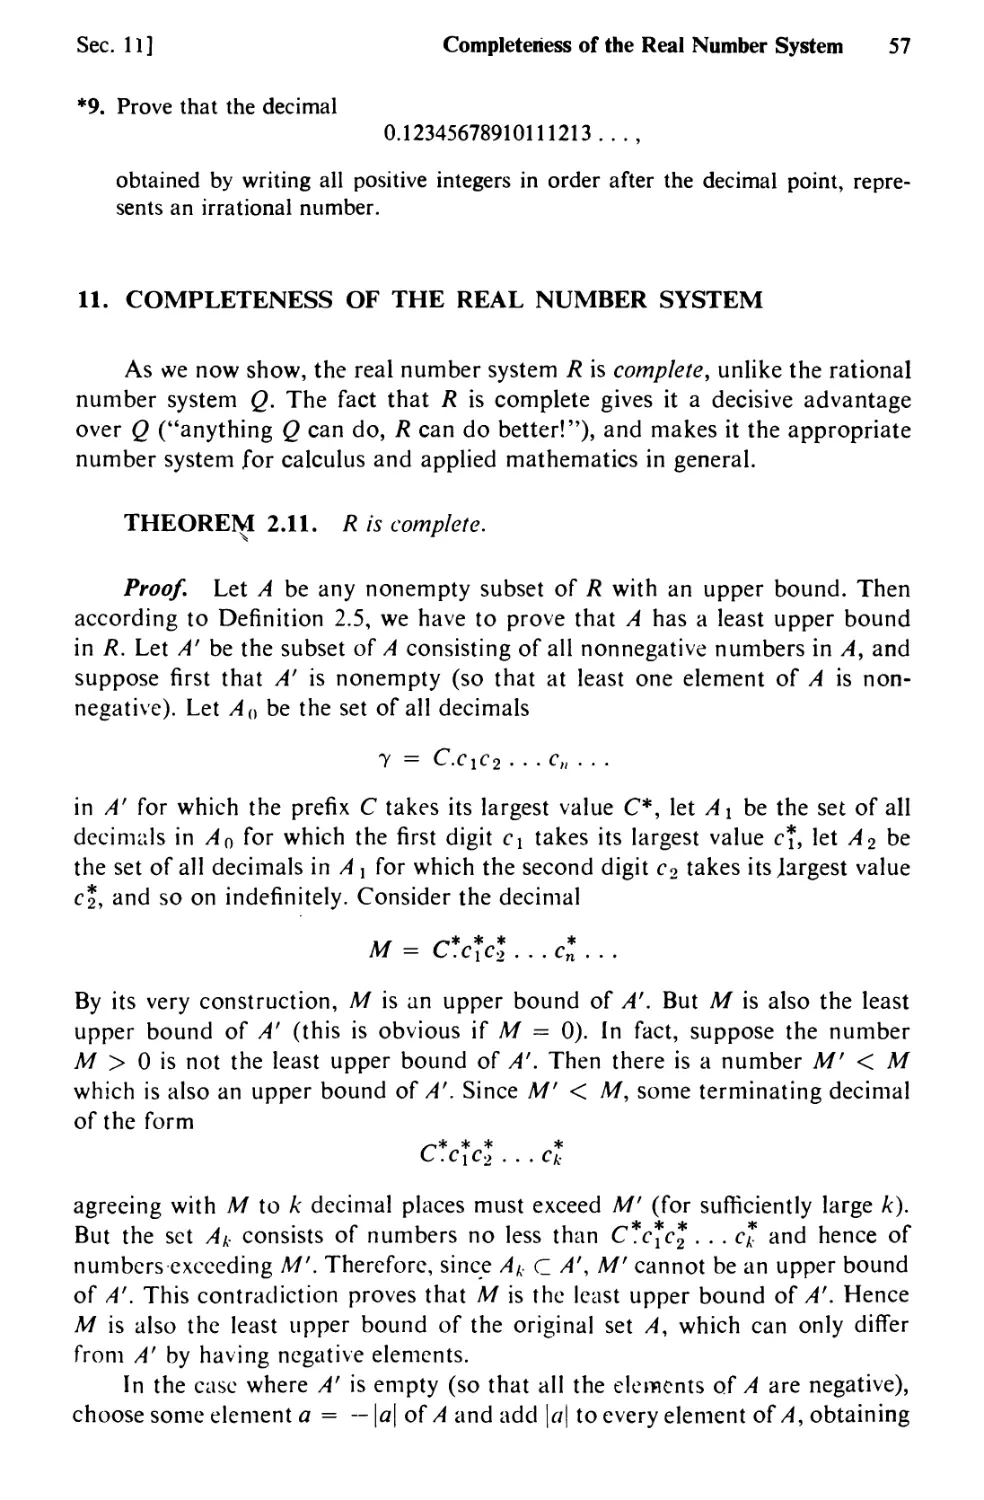 11. Completeness of the Real Number System